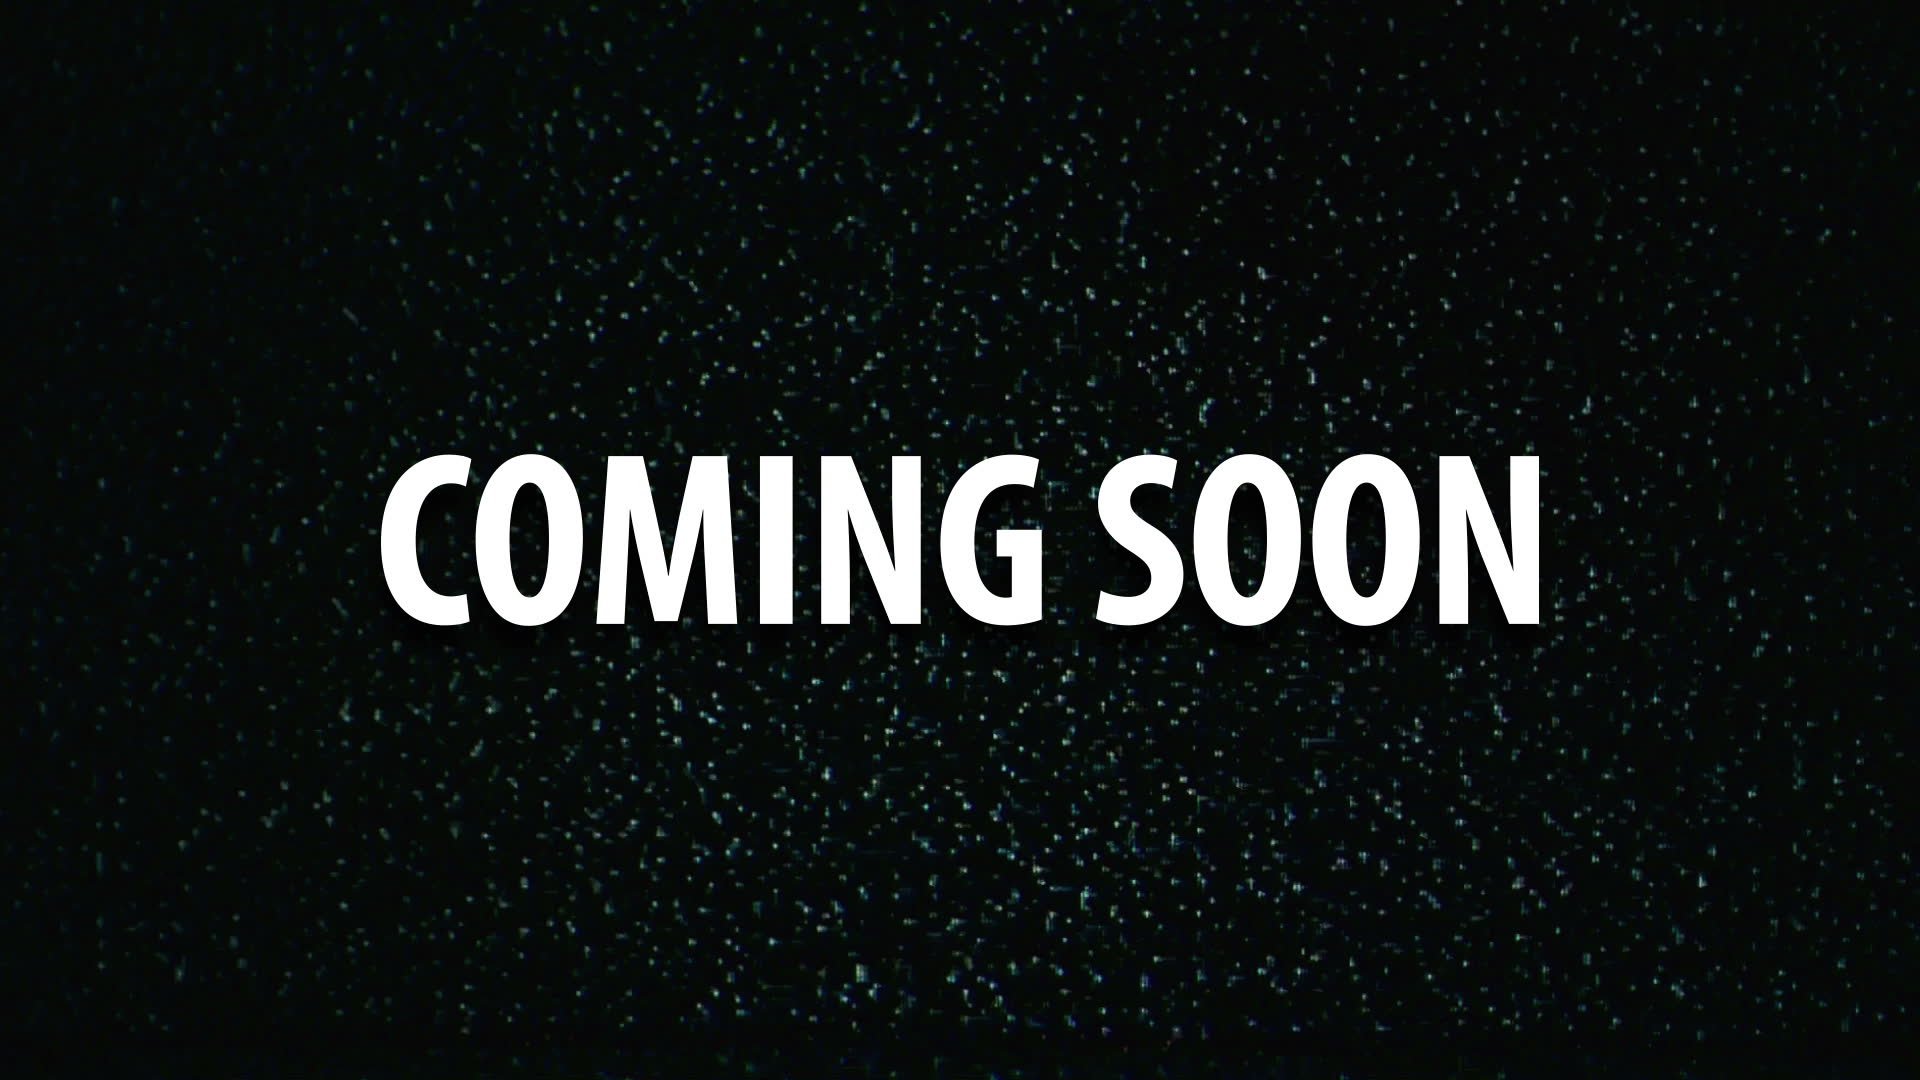 coming-soon-sign-text-coming-soon-wallpapers-hd-desktop-and-mobile-backgrounds